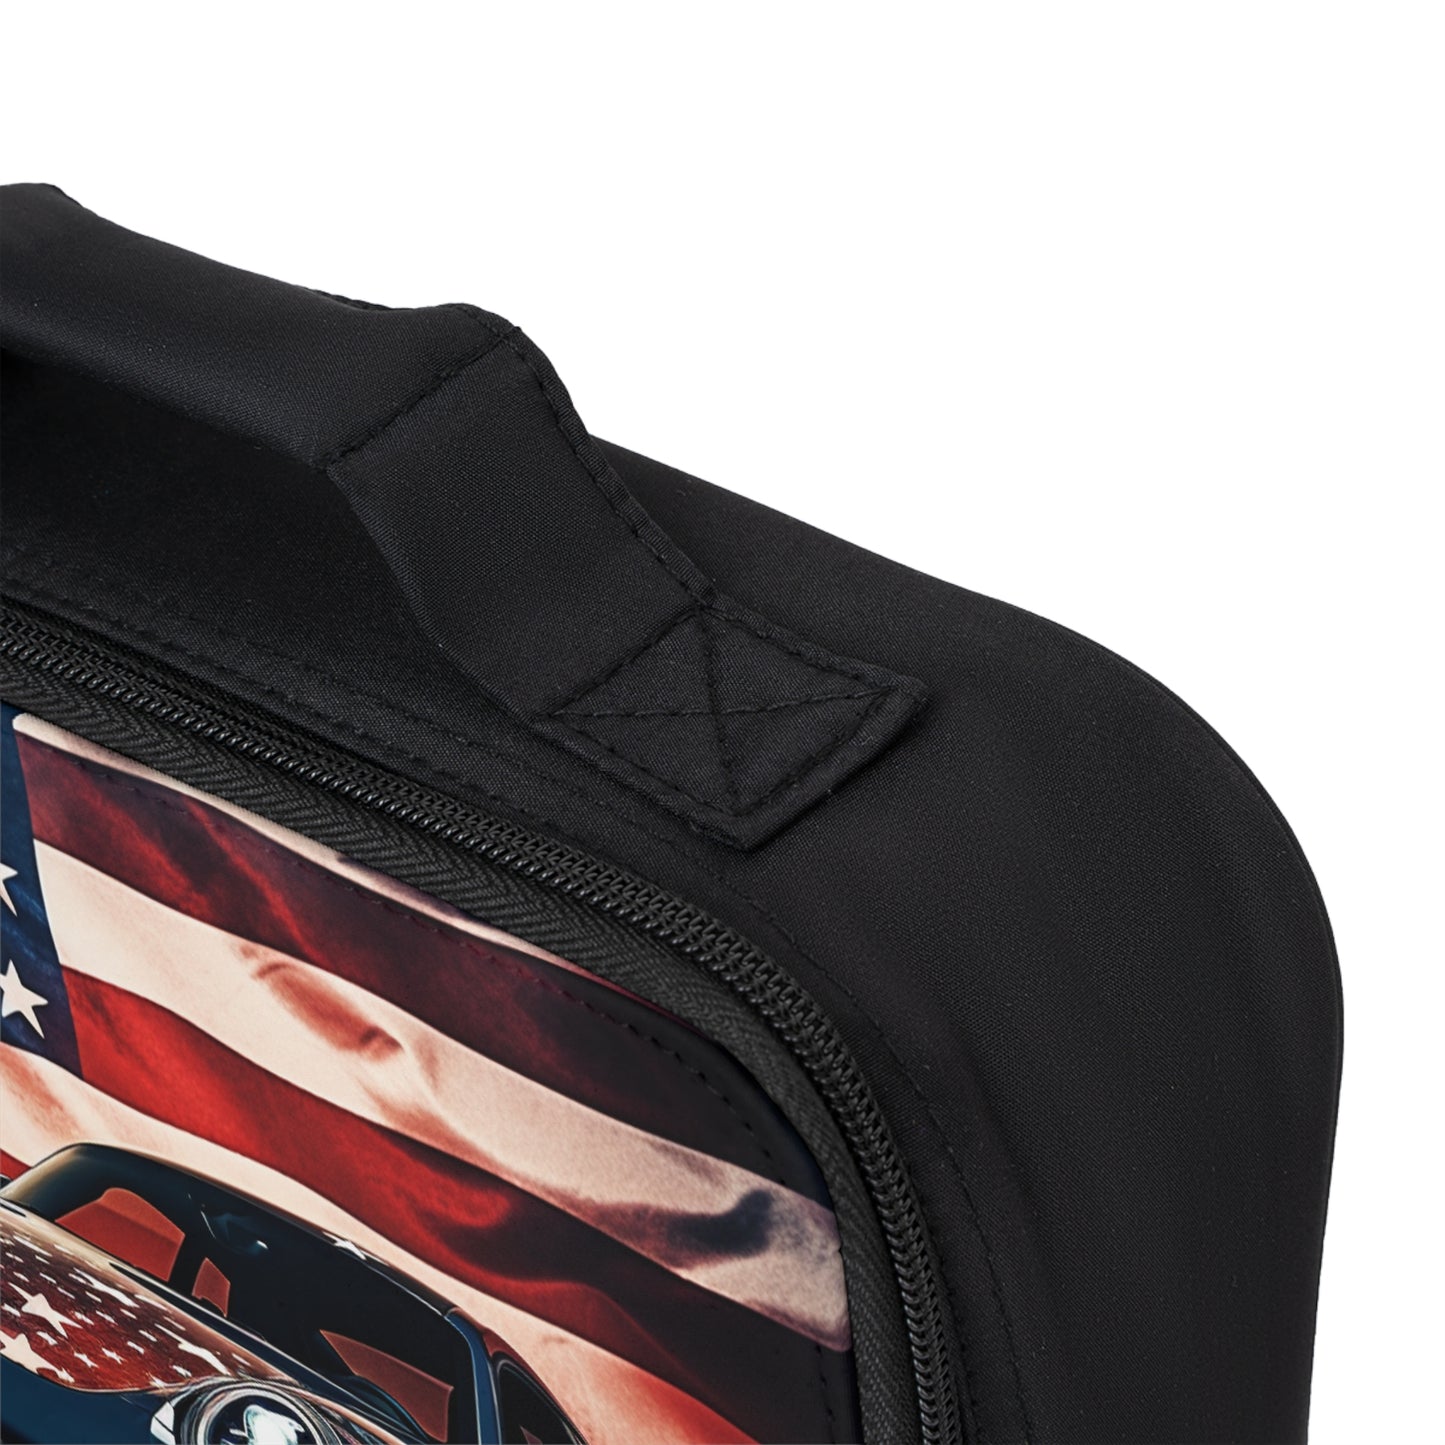 Lunch Bag Abstract American Flag Background Porsche 2